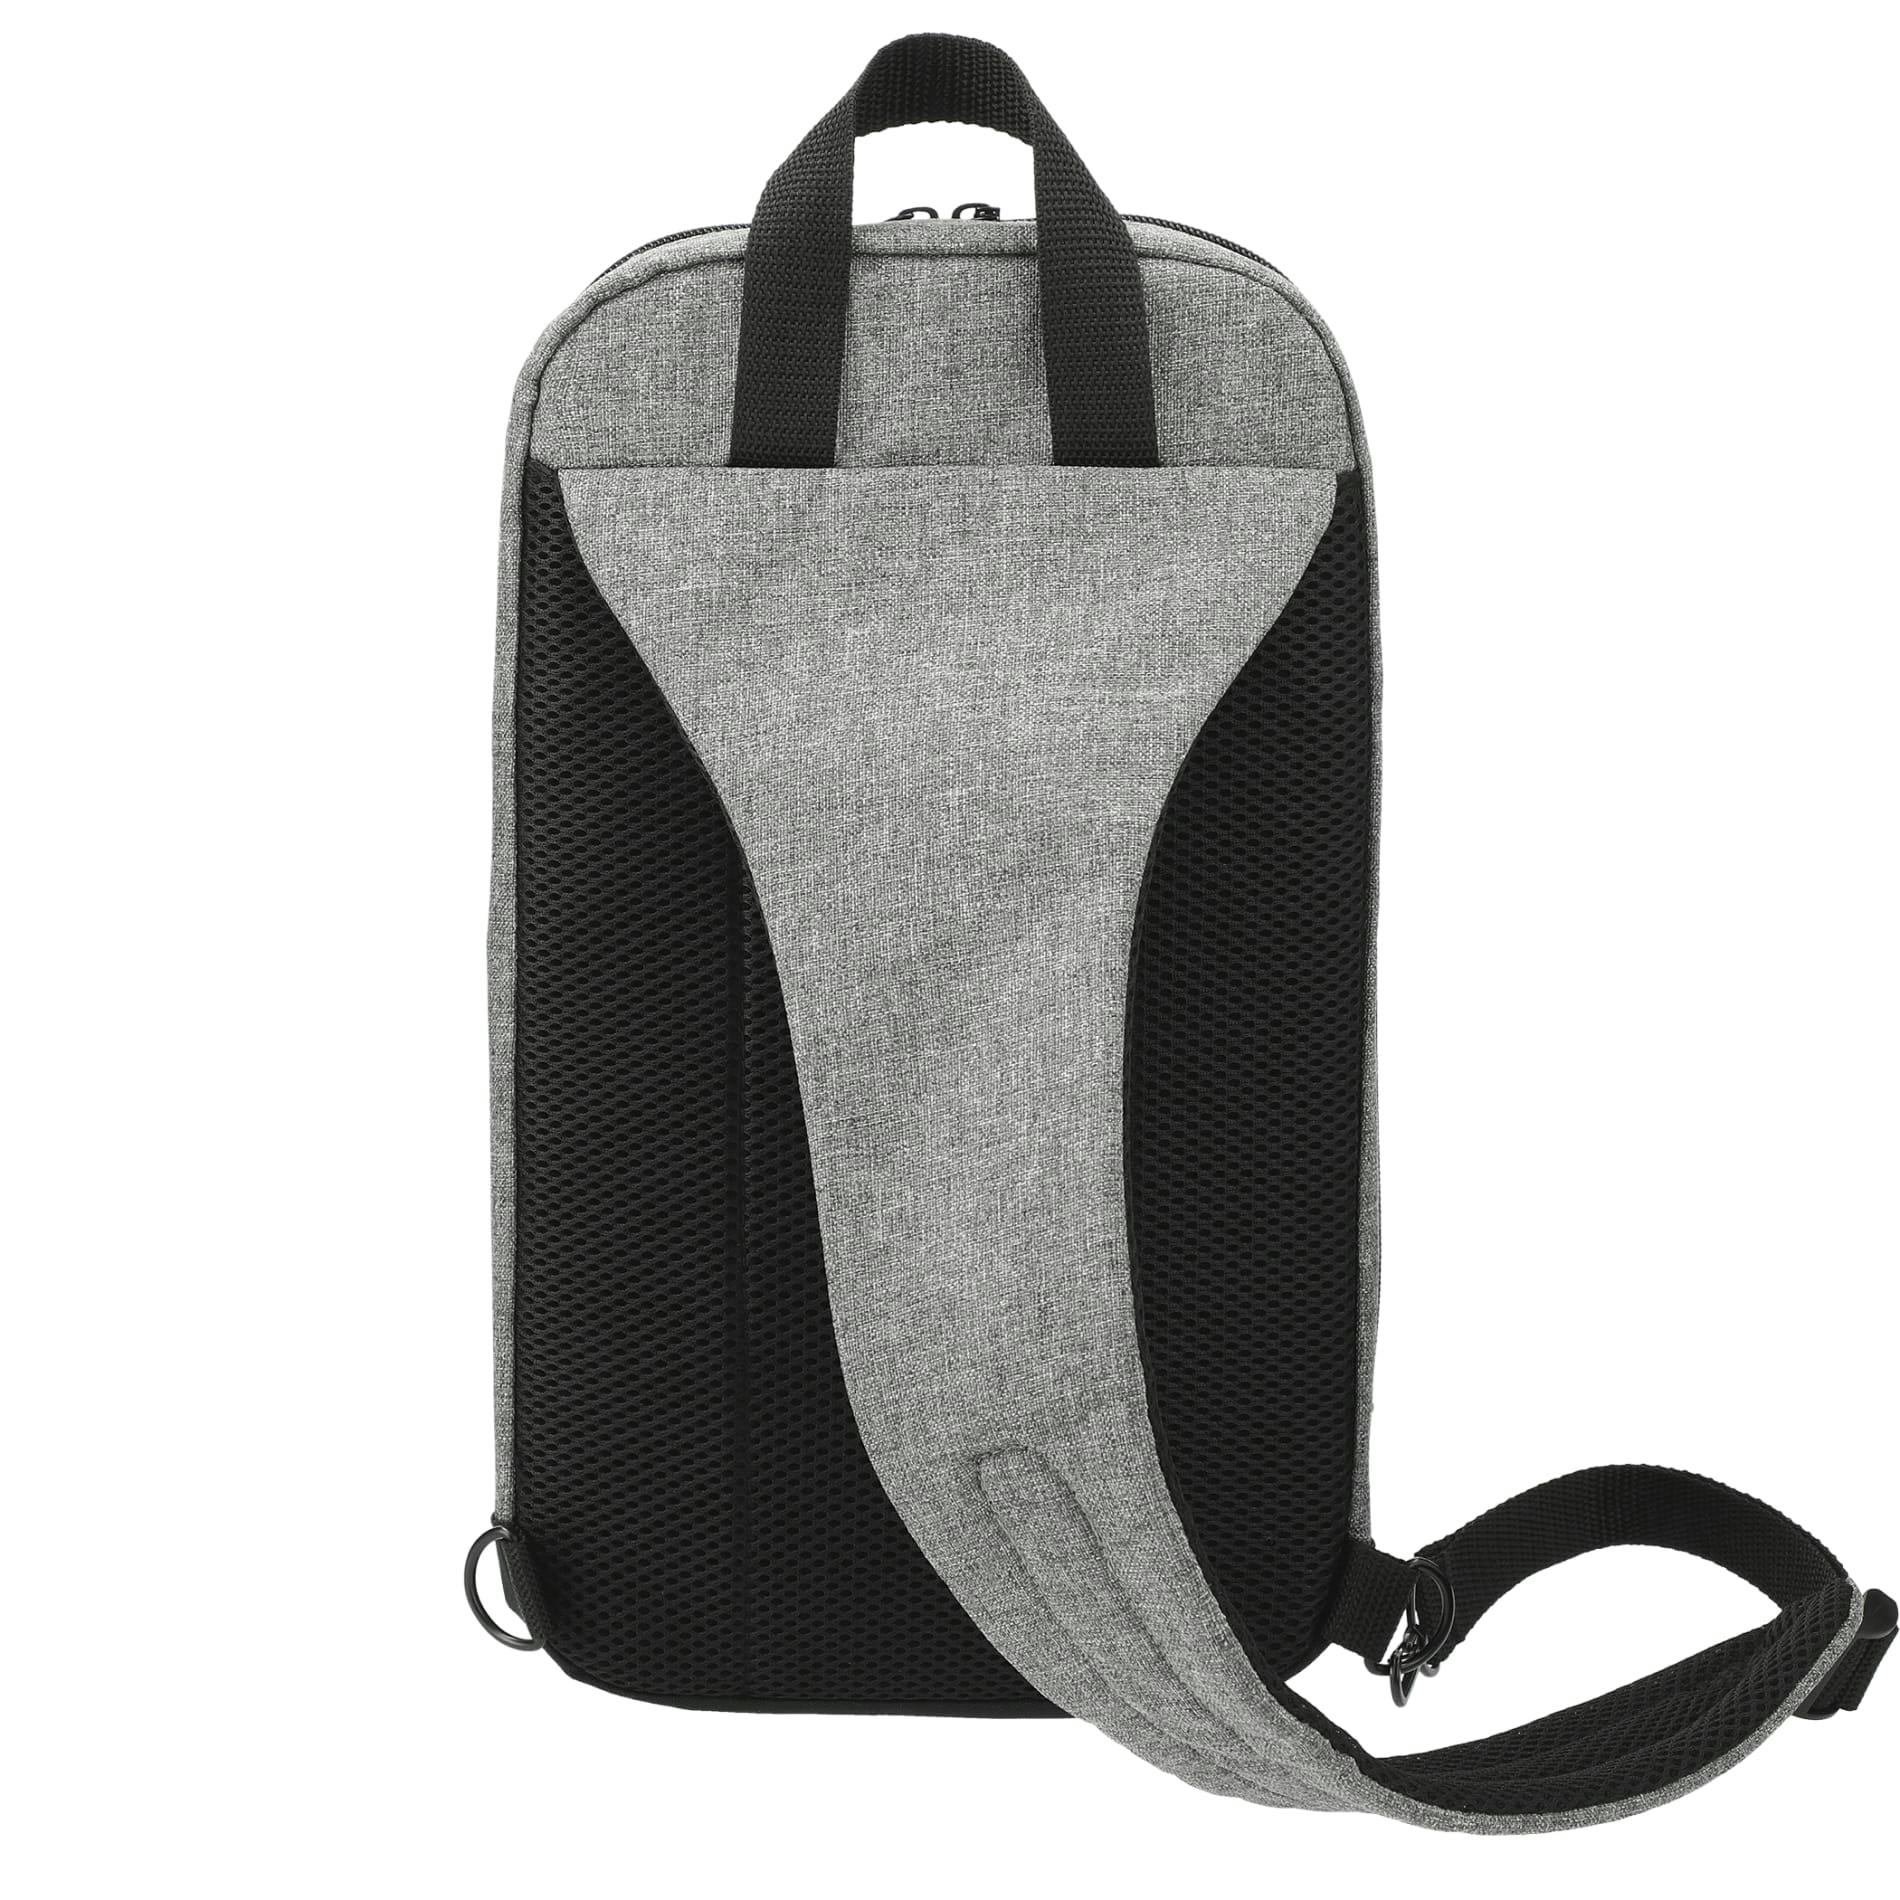 Graphite Deluxe Recycled Sling Backpack - additional Image 5